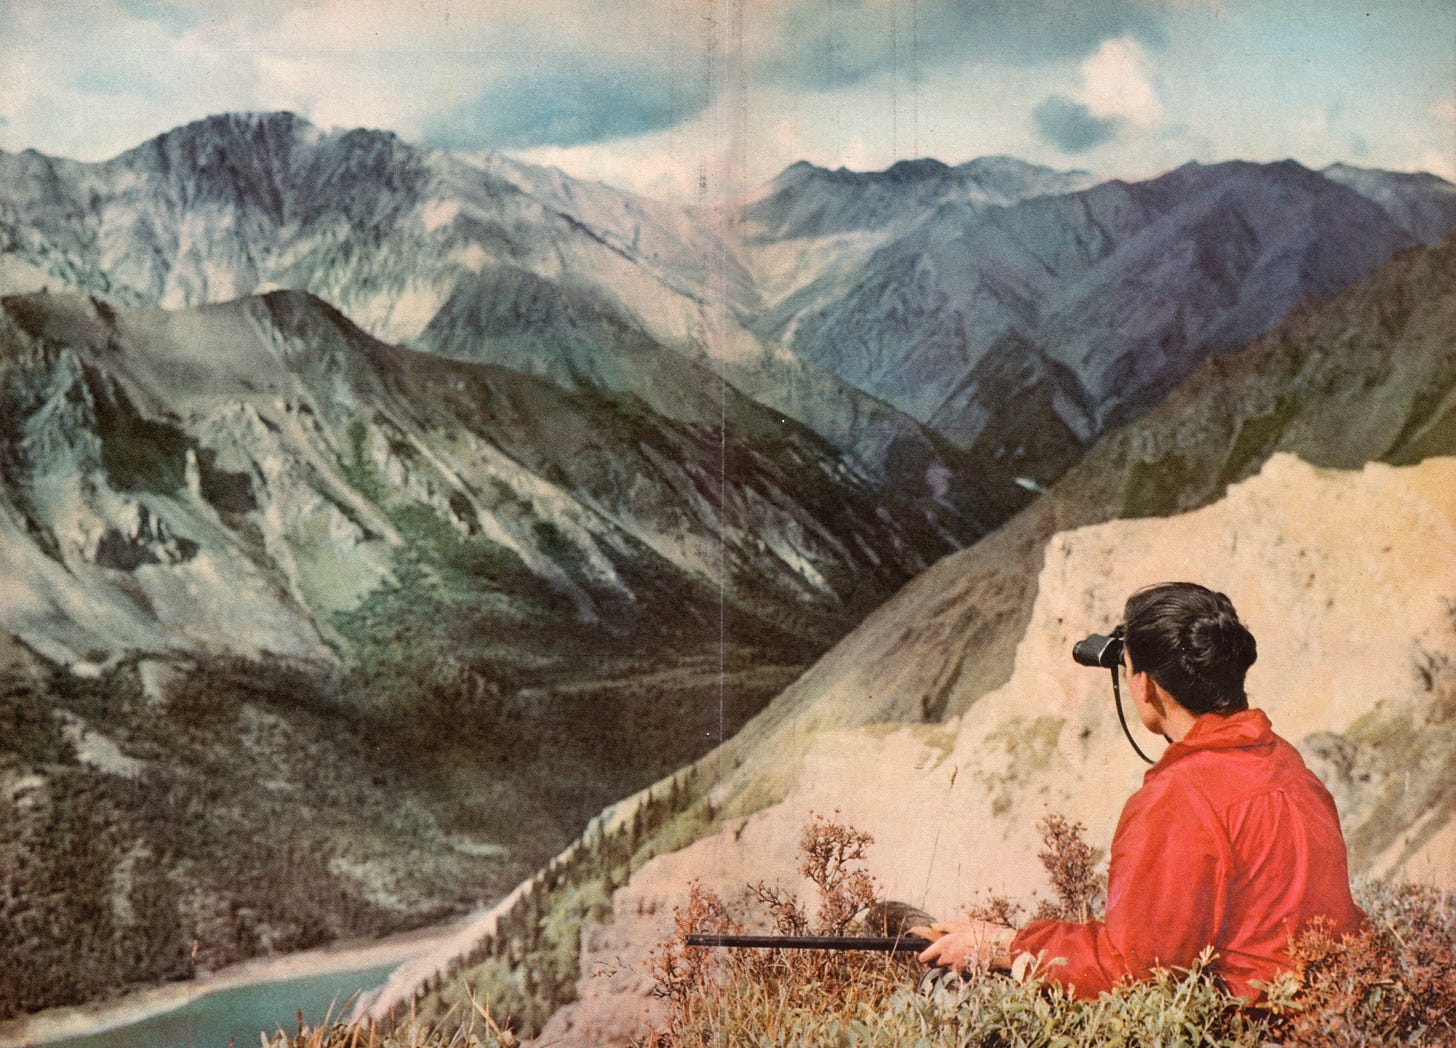 Virginia Kraft looks over the Alaskan wilderness on assignment for Sports Illustrated, 1959. Photo Courtesy Virginia Kraft Payson Estate